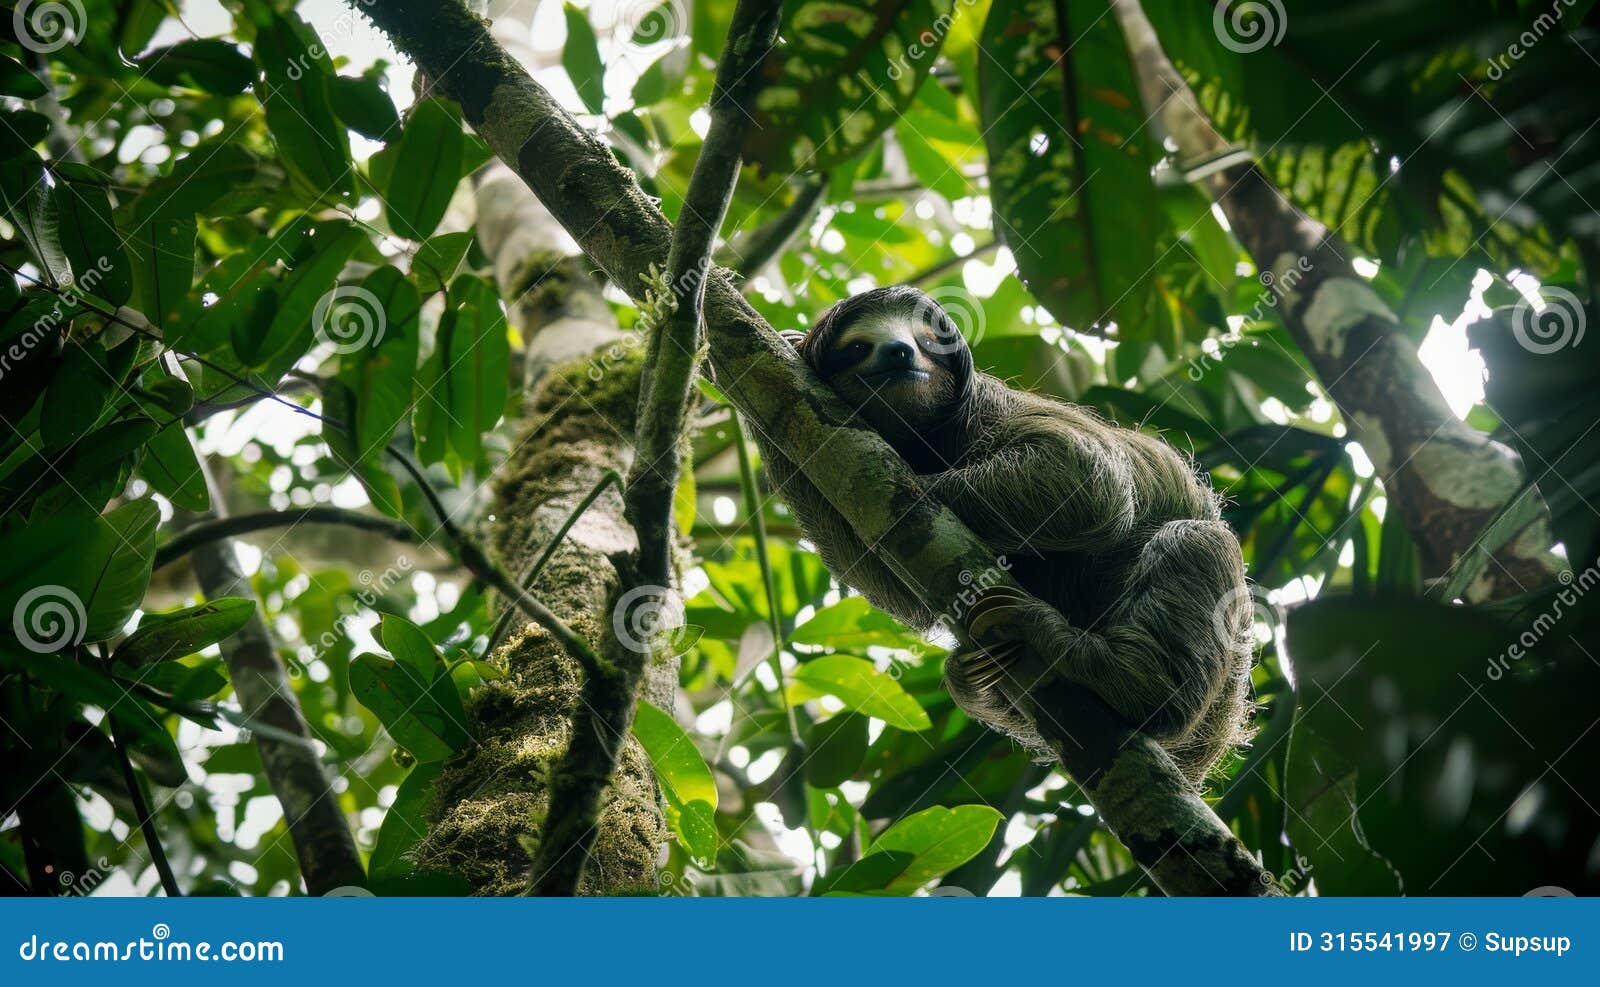 a primate lounges on a jungle tree branch among wildlife